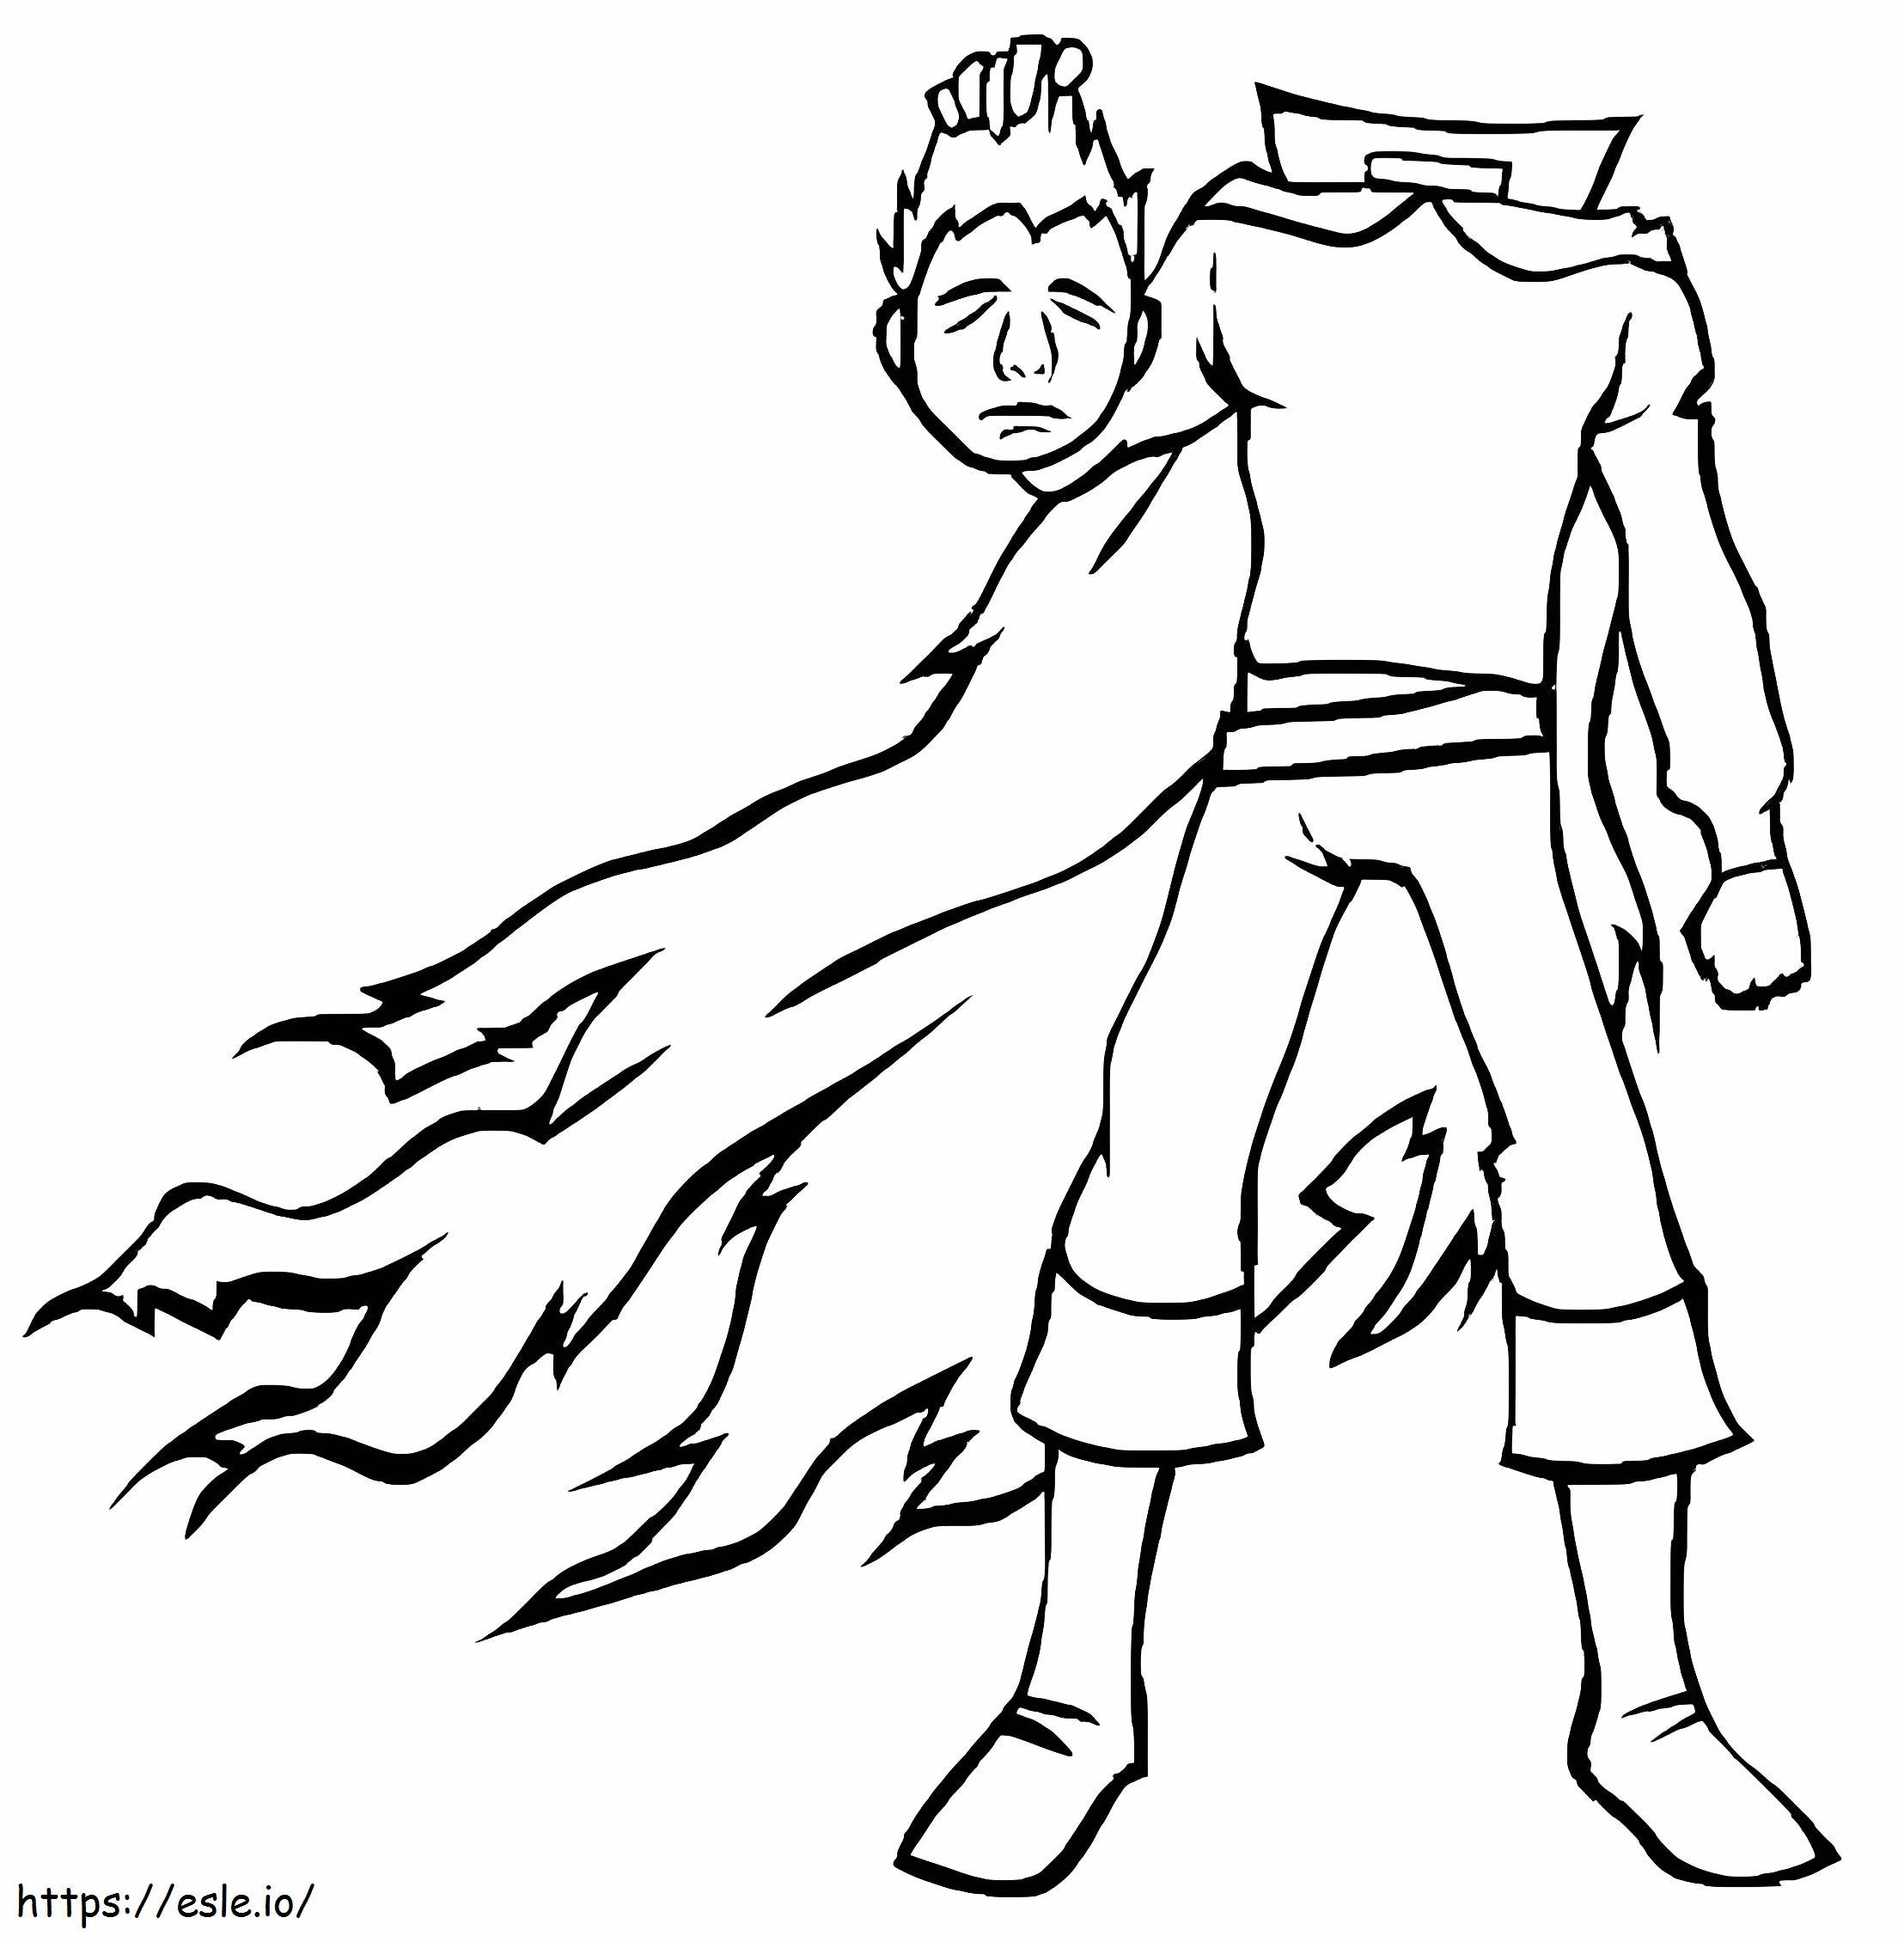 Spooky Headless Horseman coloring page